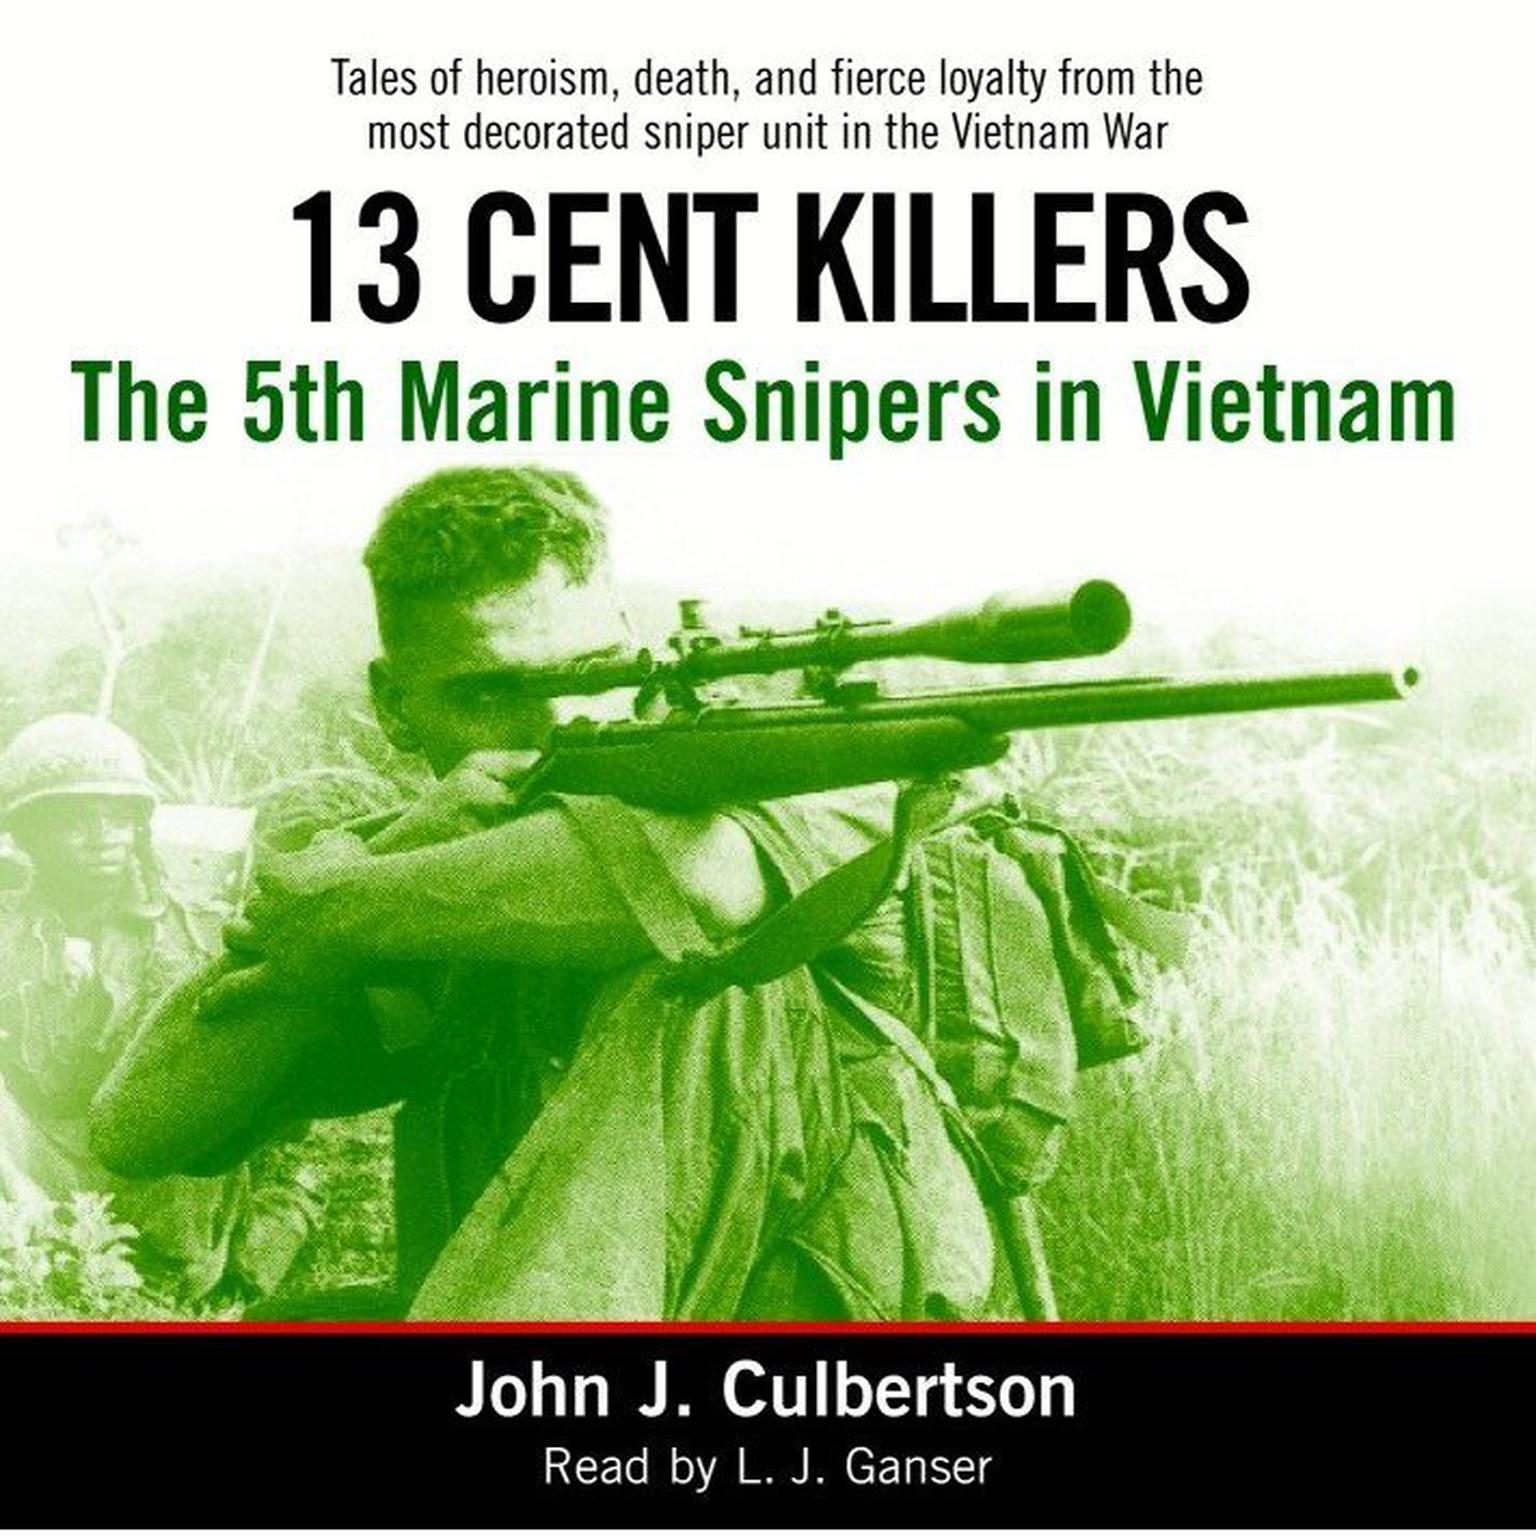 13 Cent Killers (Abridged): The 5th Marine Snipers in Vietnam Audiobook, by John Culbertson